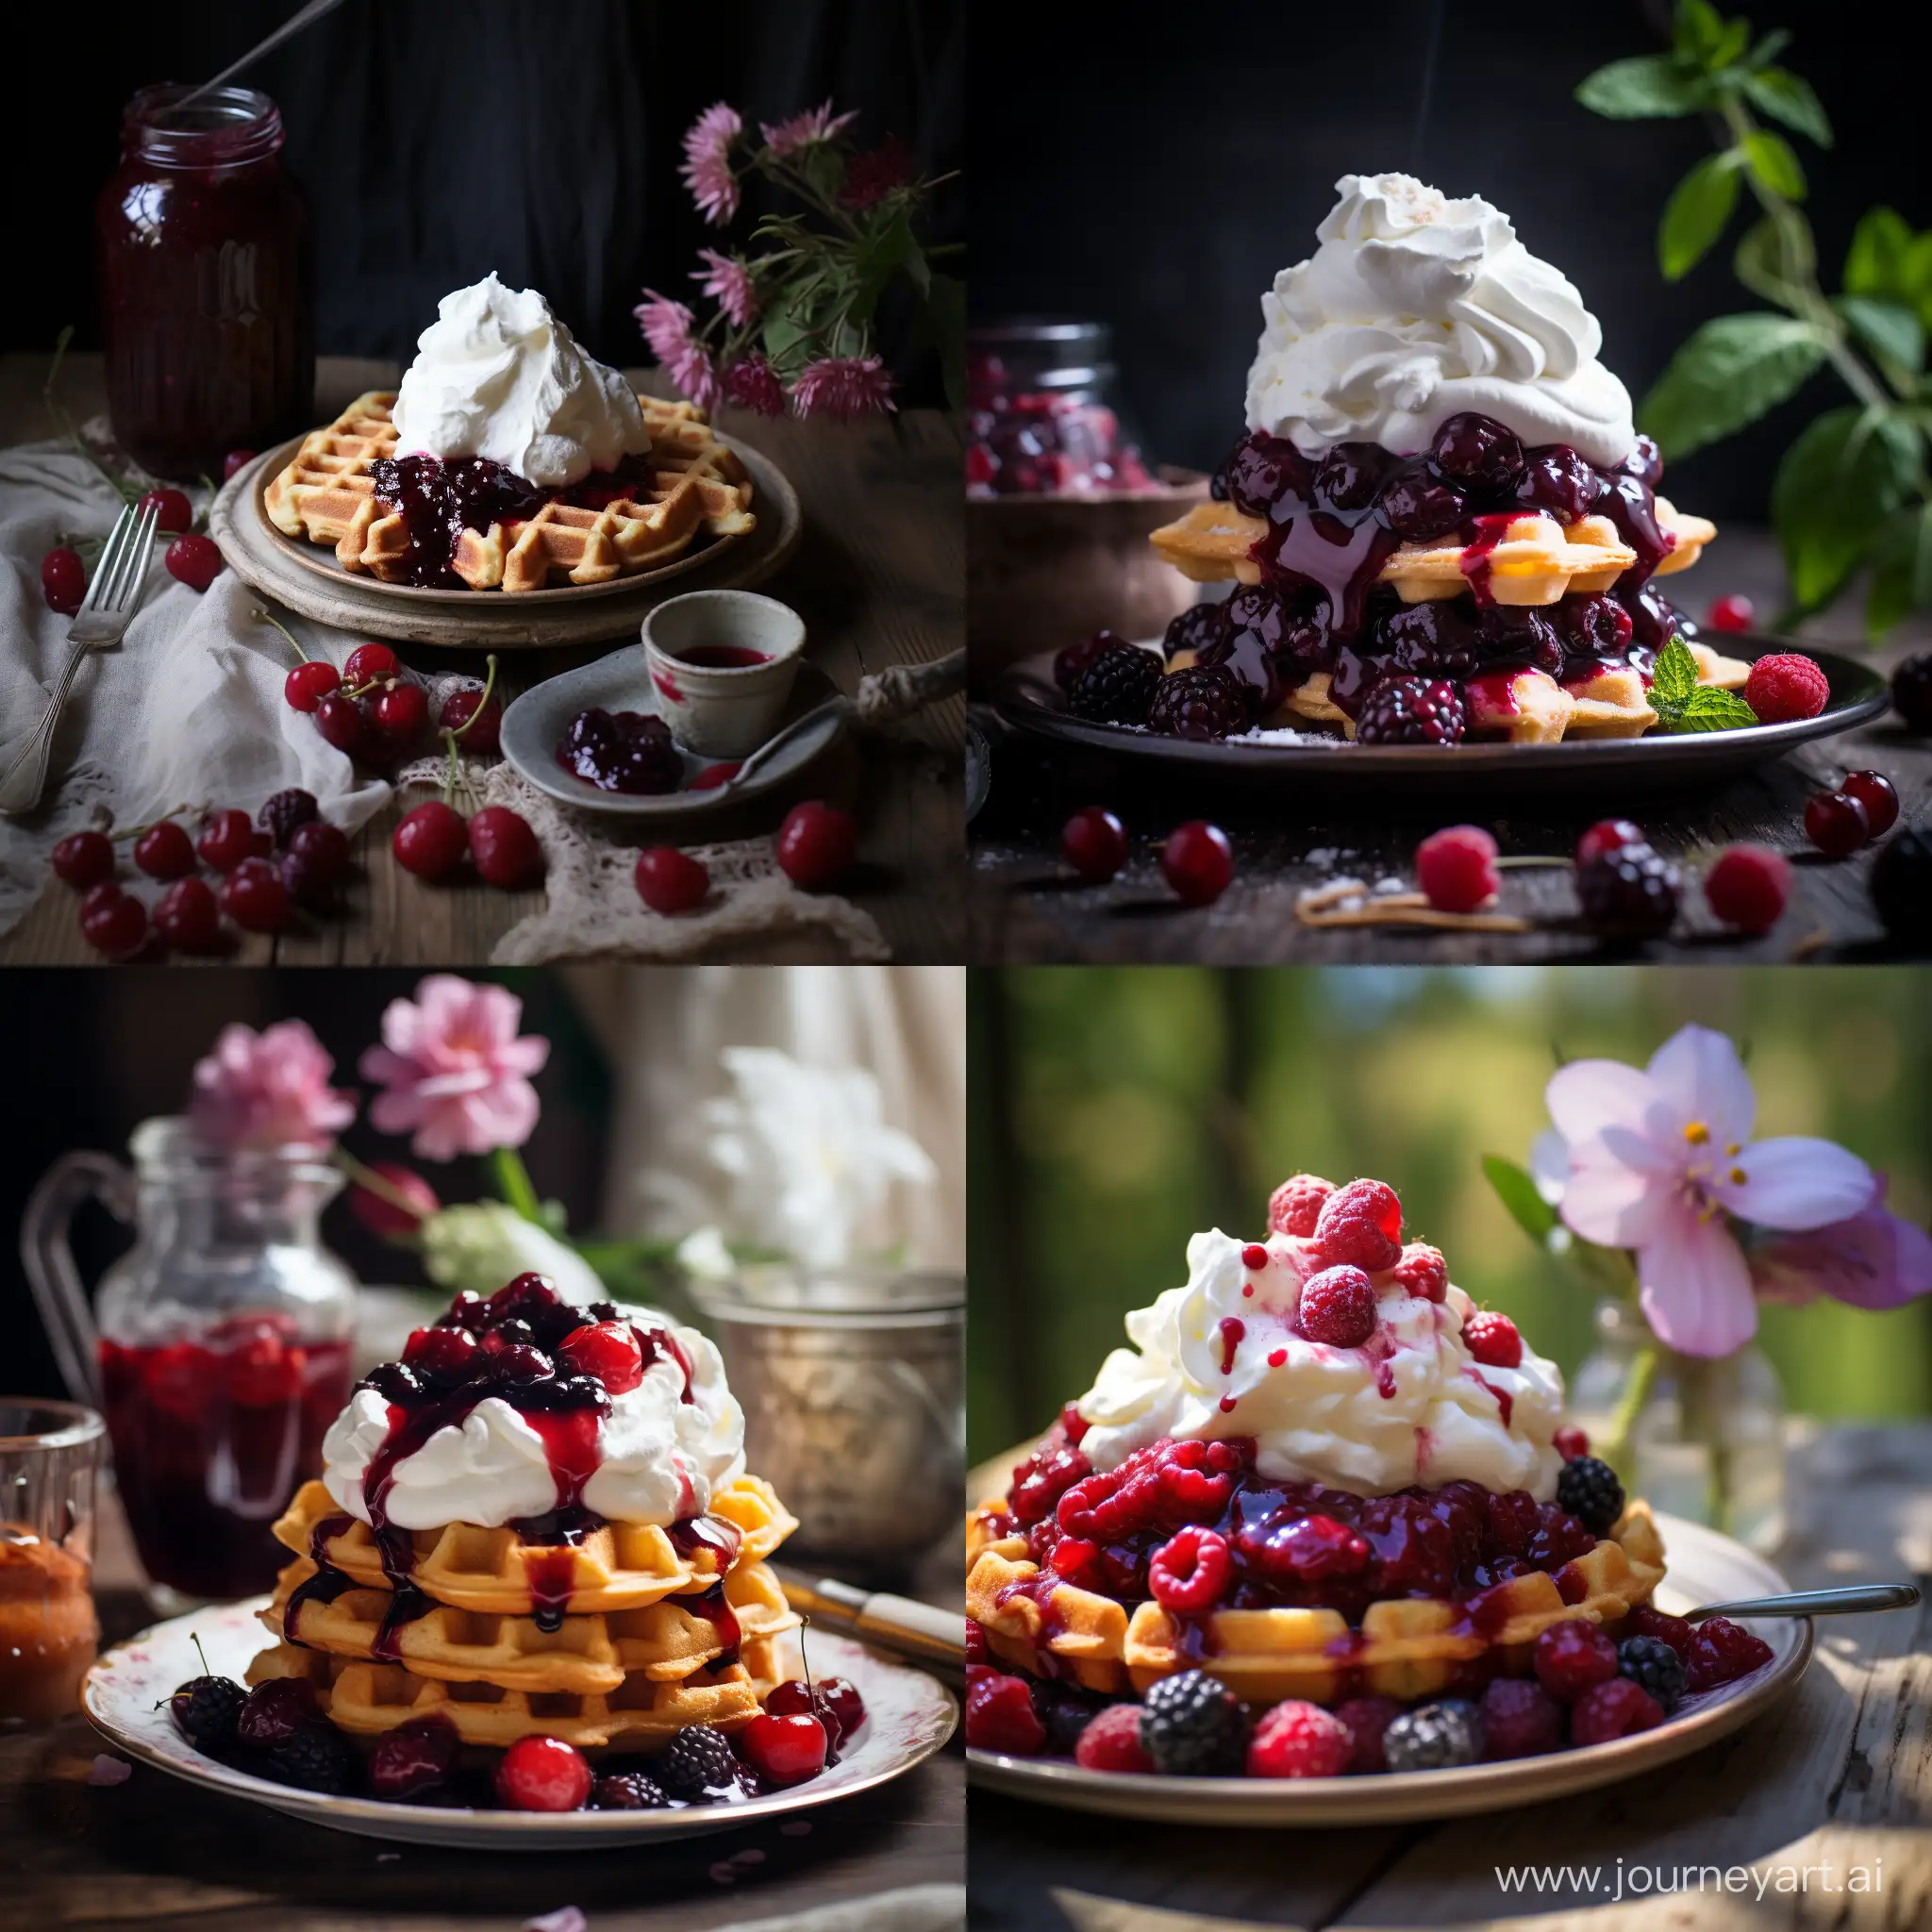 Delicious-Waffles-with-Berry-Jam-and-Aromatic-Whipped-Cream